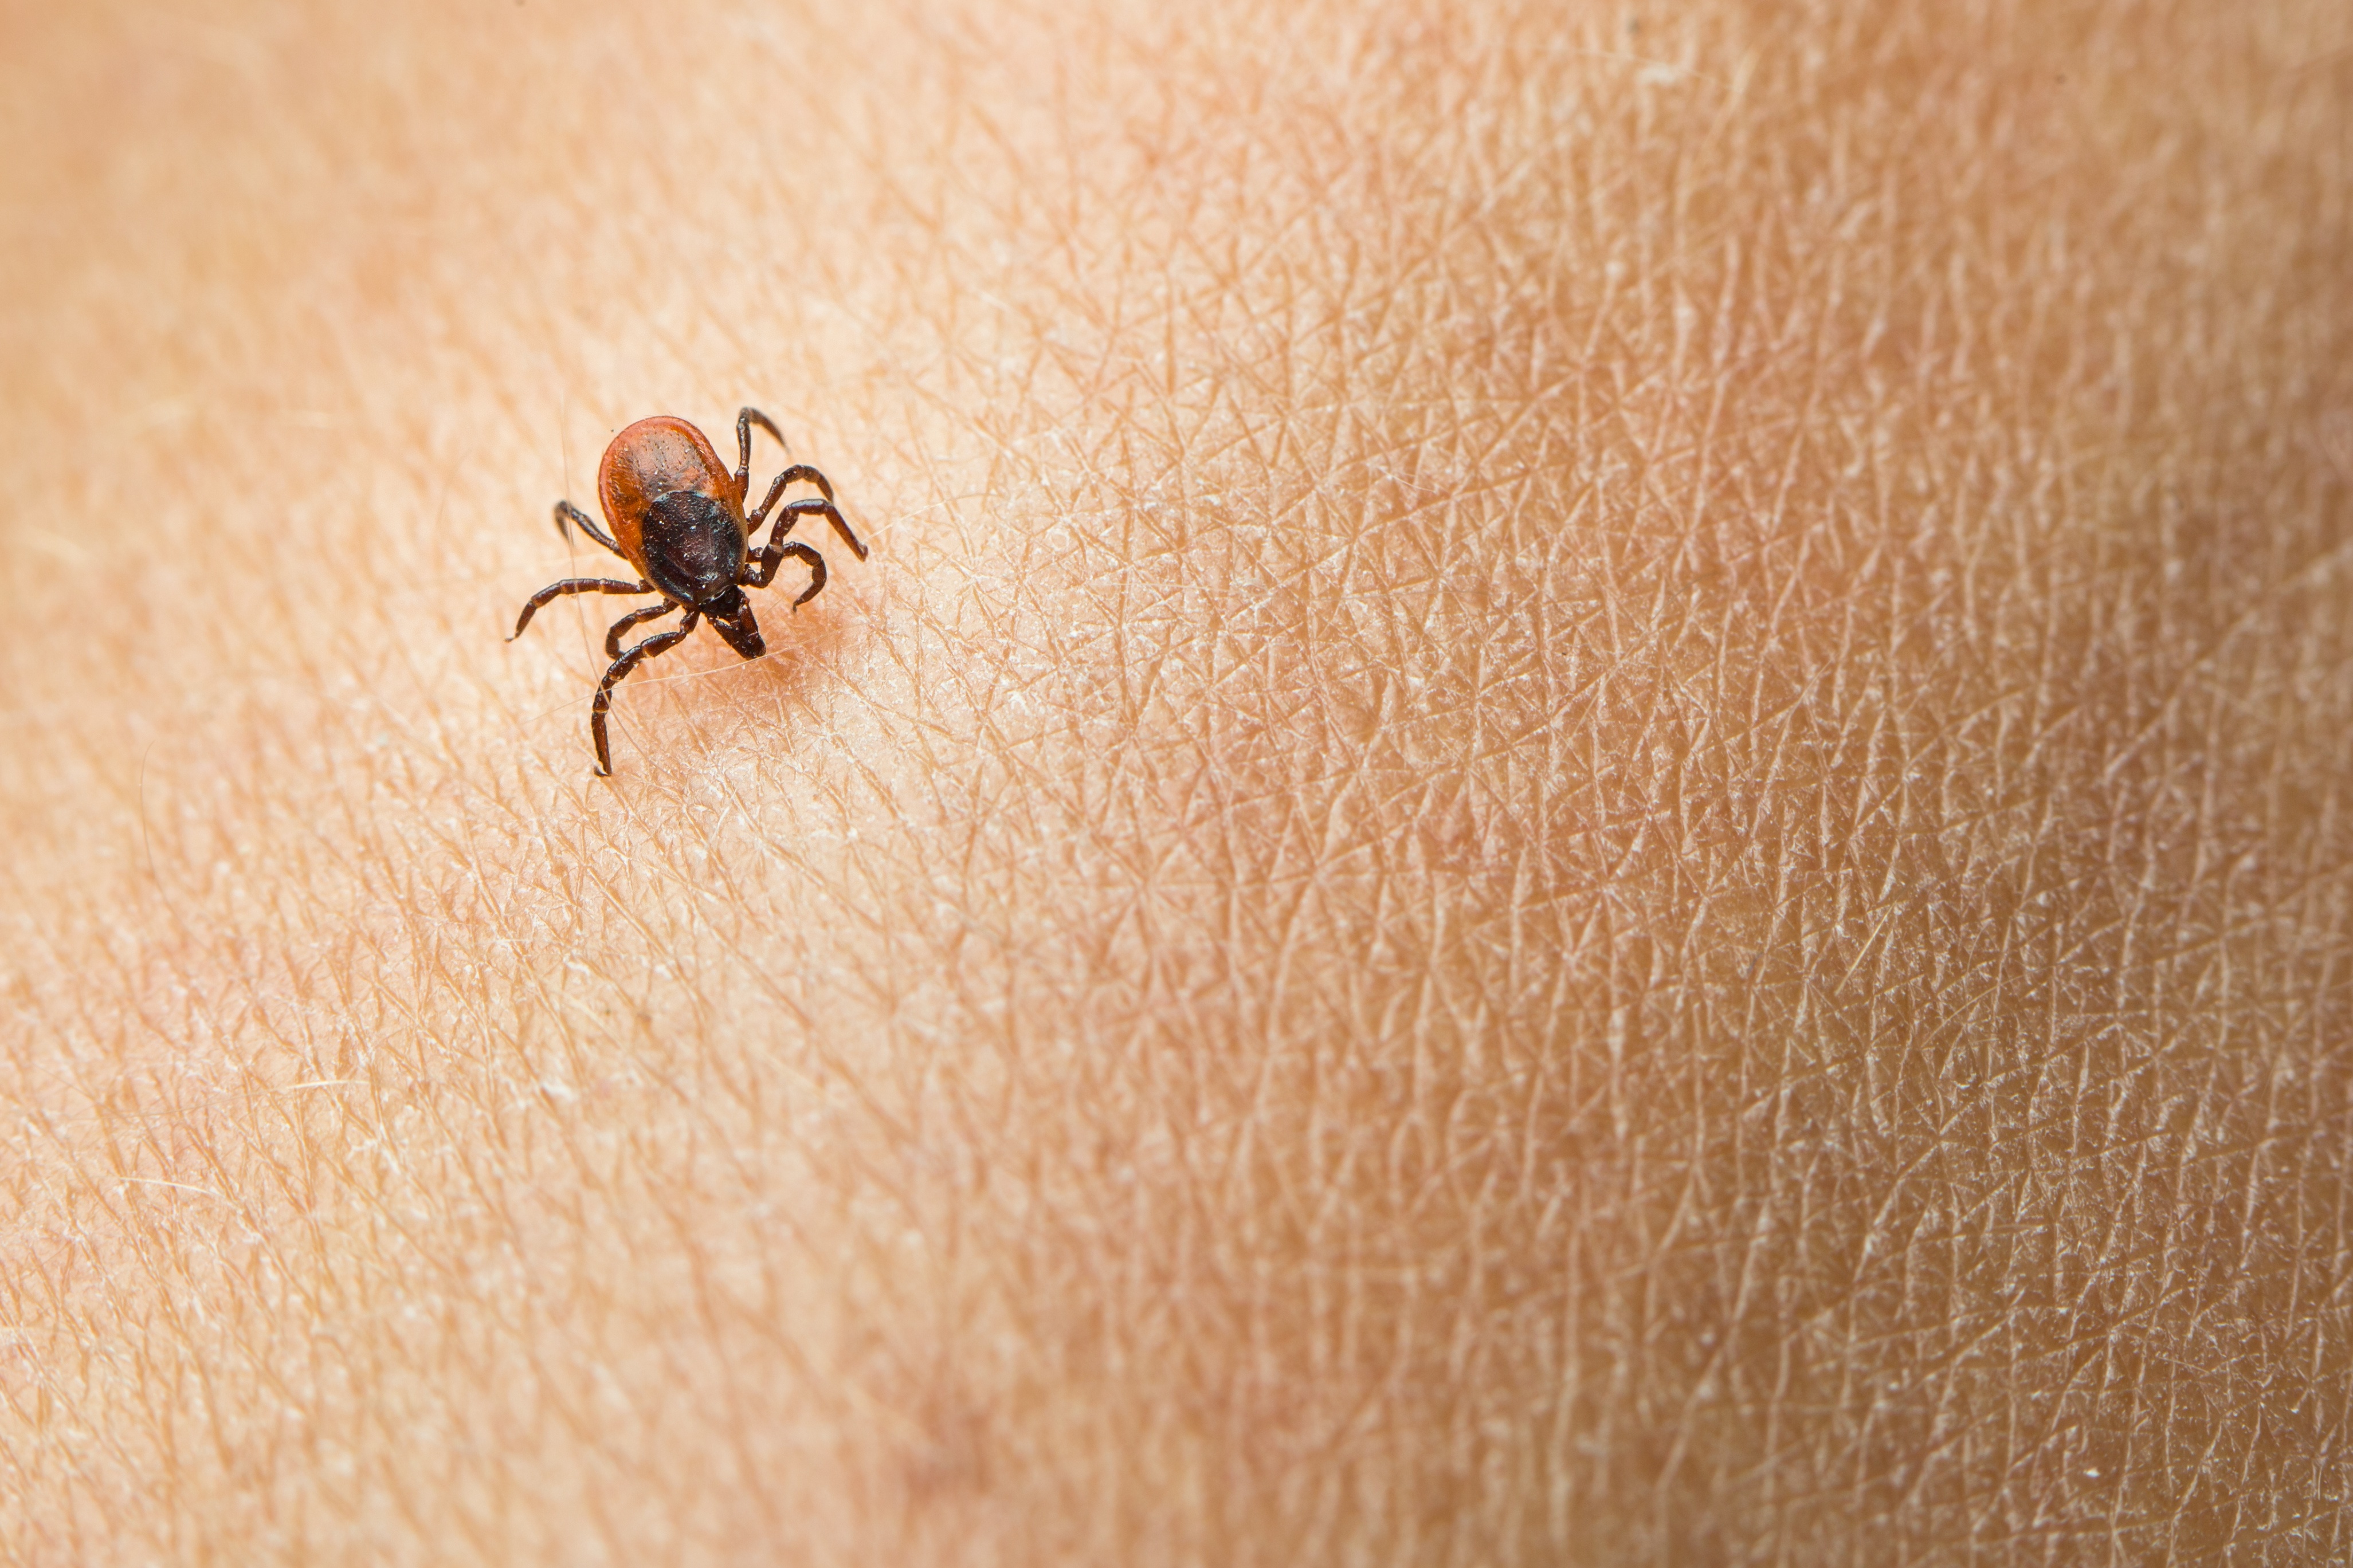 While ticks can be active all year round, they are most common in spring and fall.